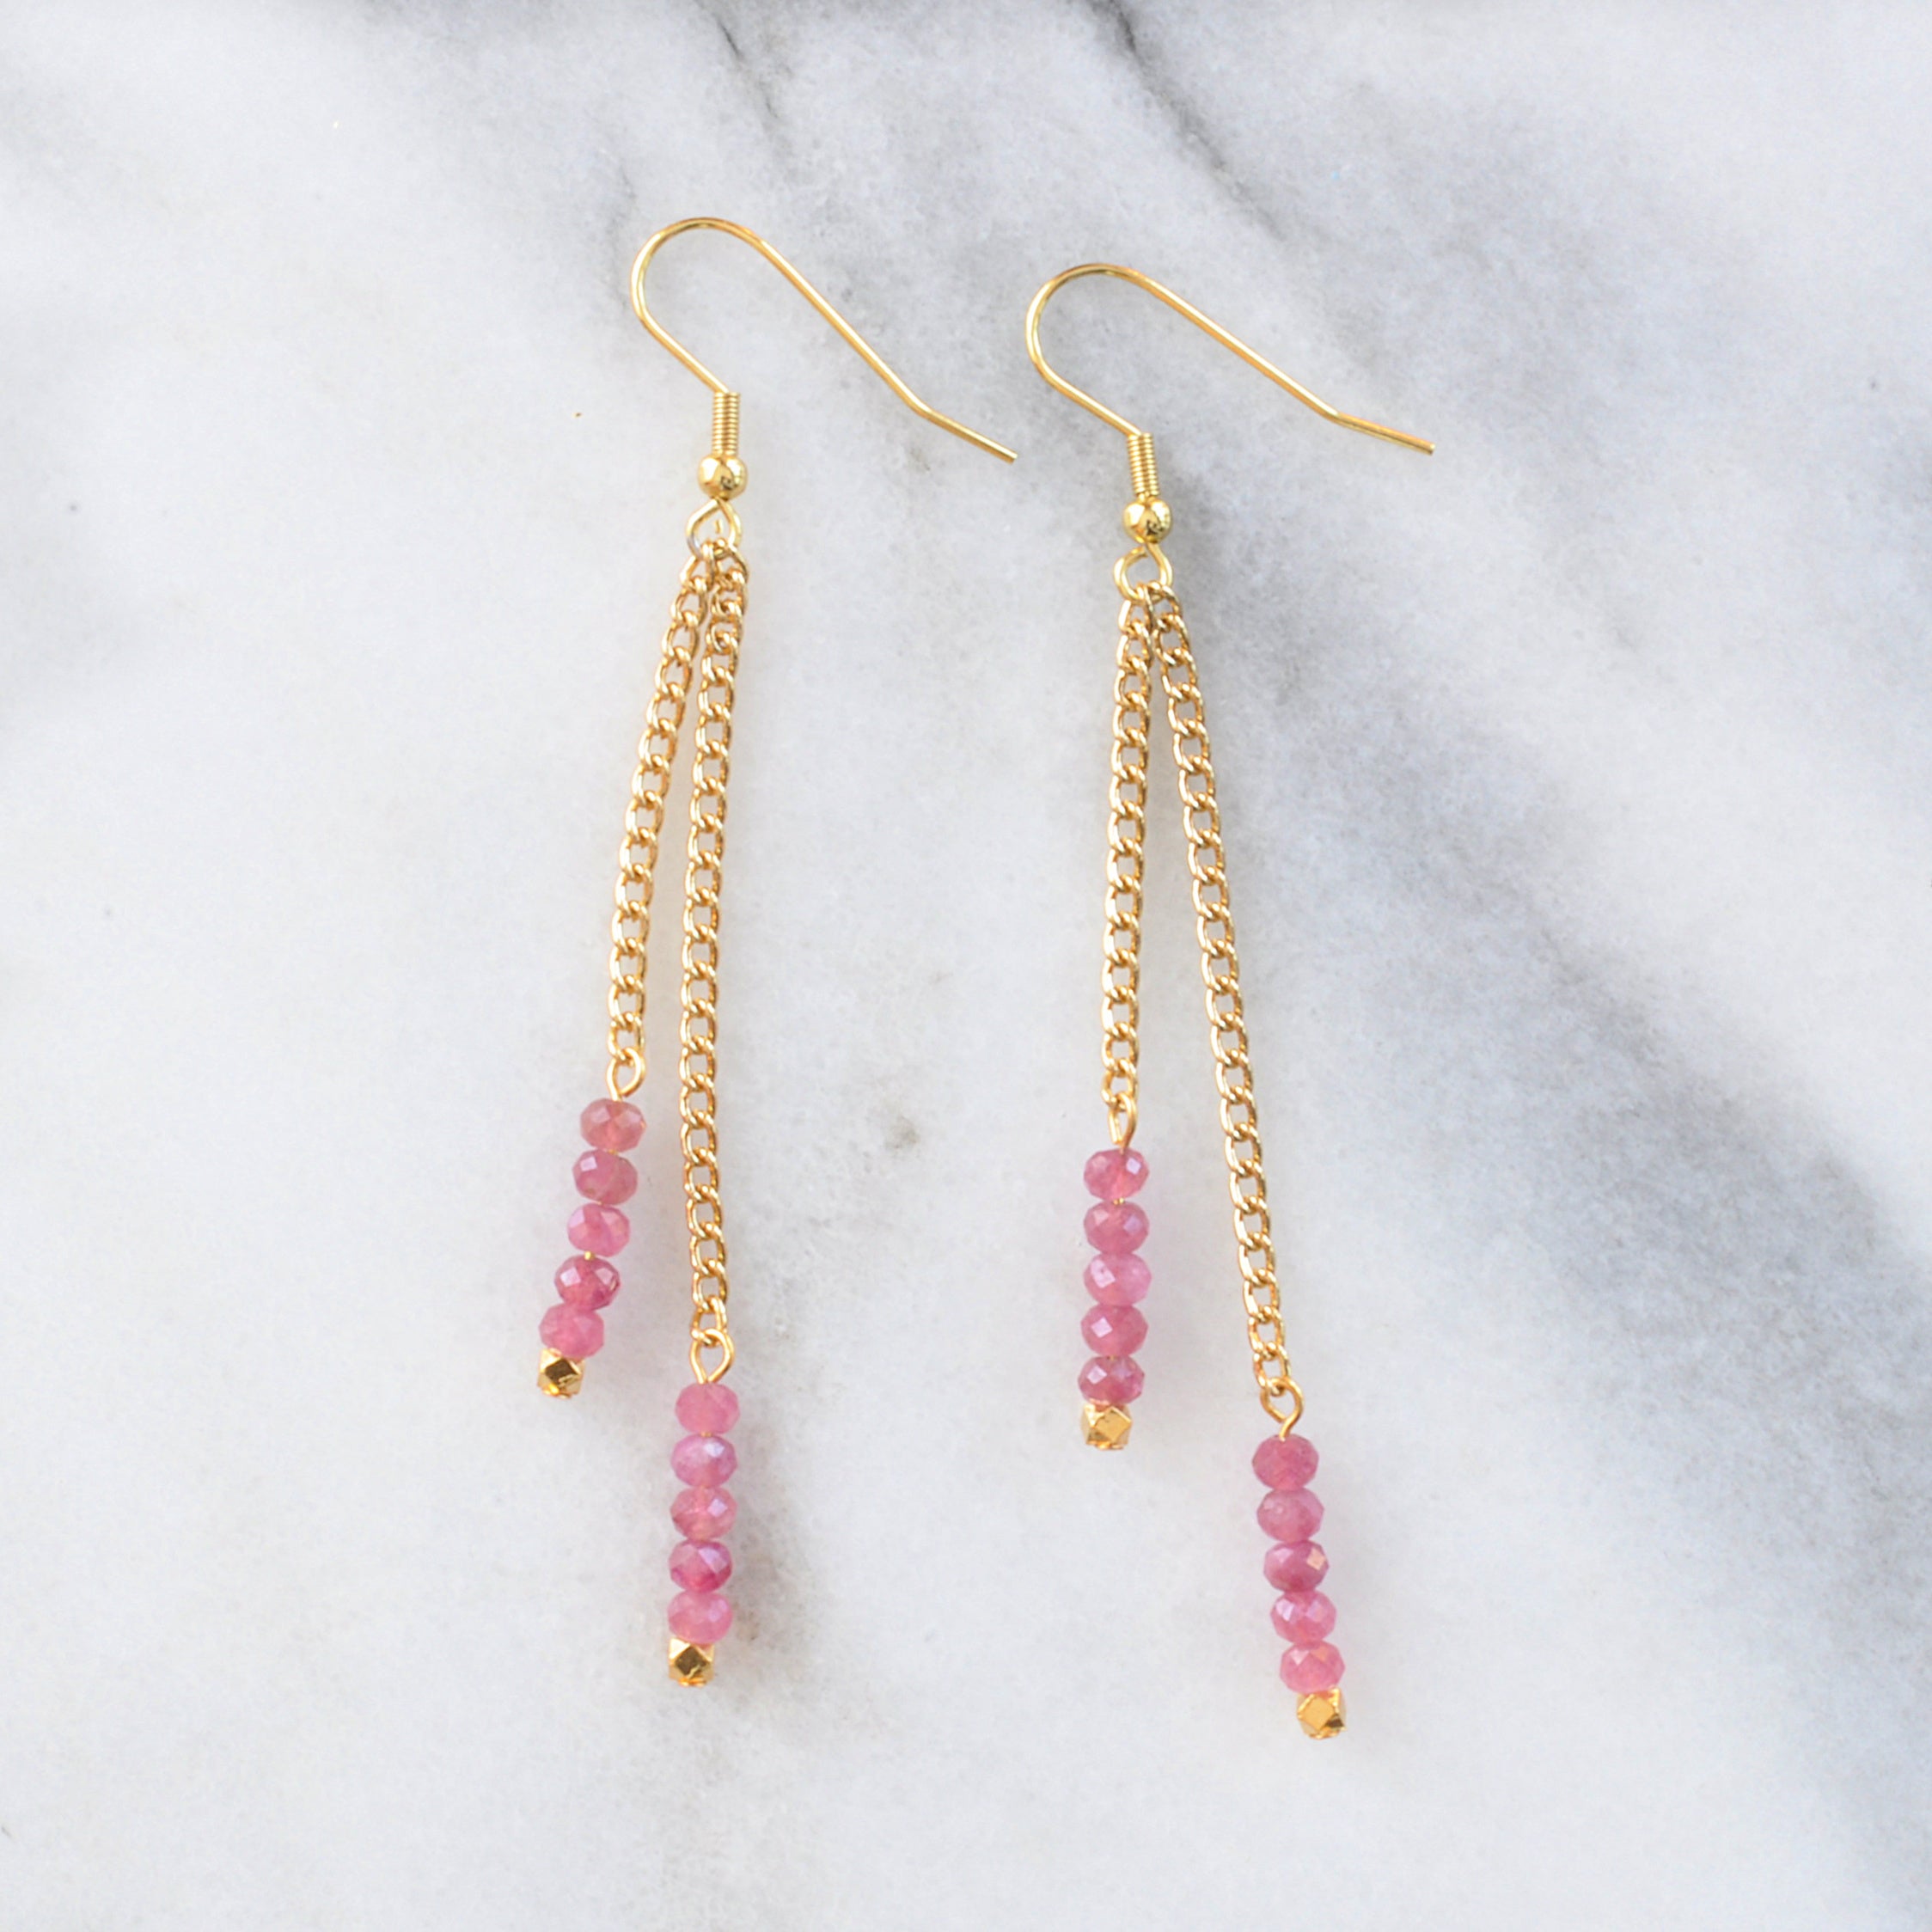 Libby & Smee Gemstone Gold chain Earrings available with Pink Tourmaline  beads